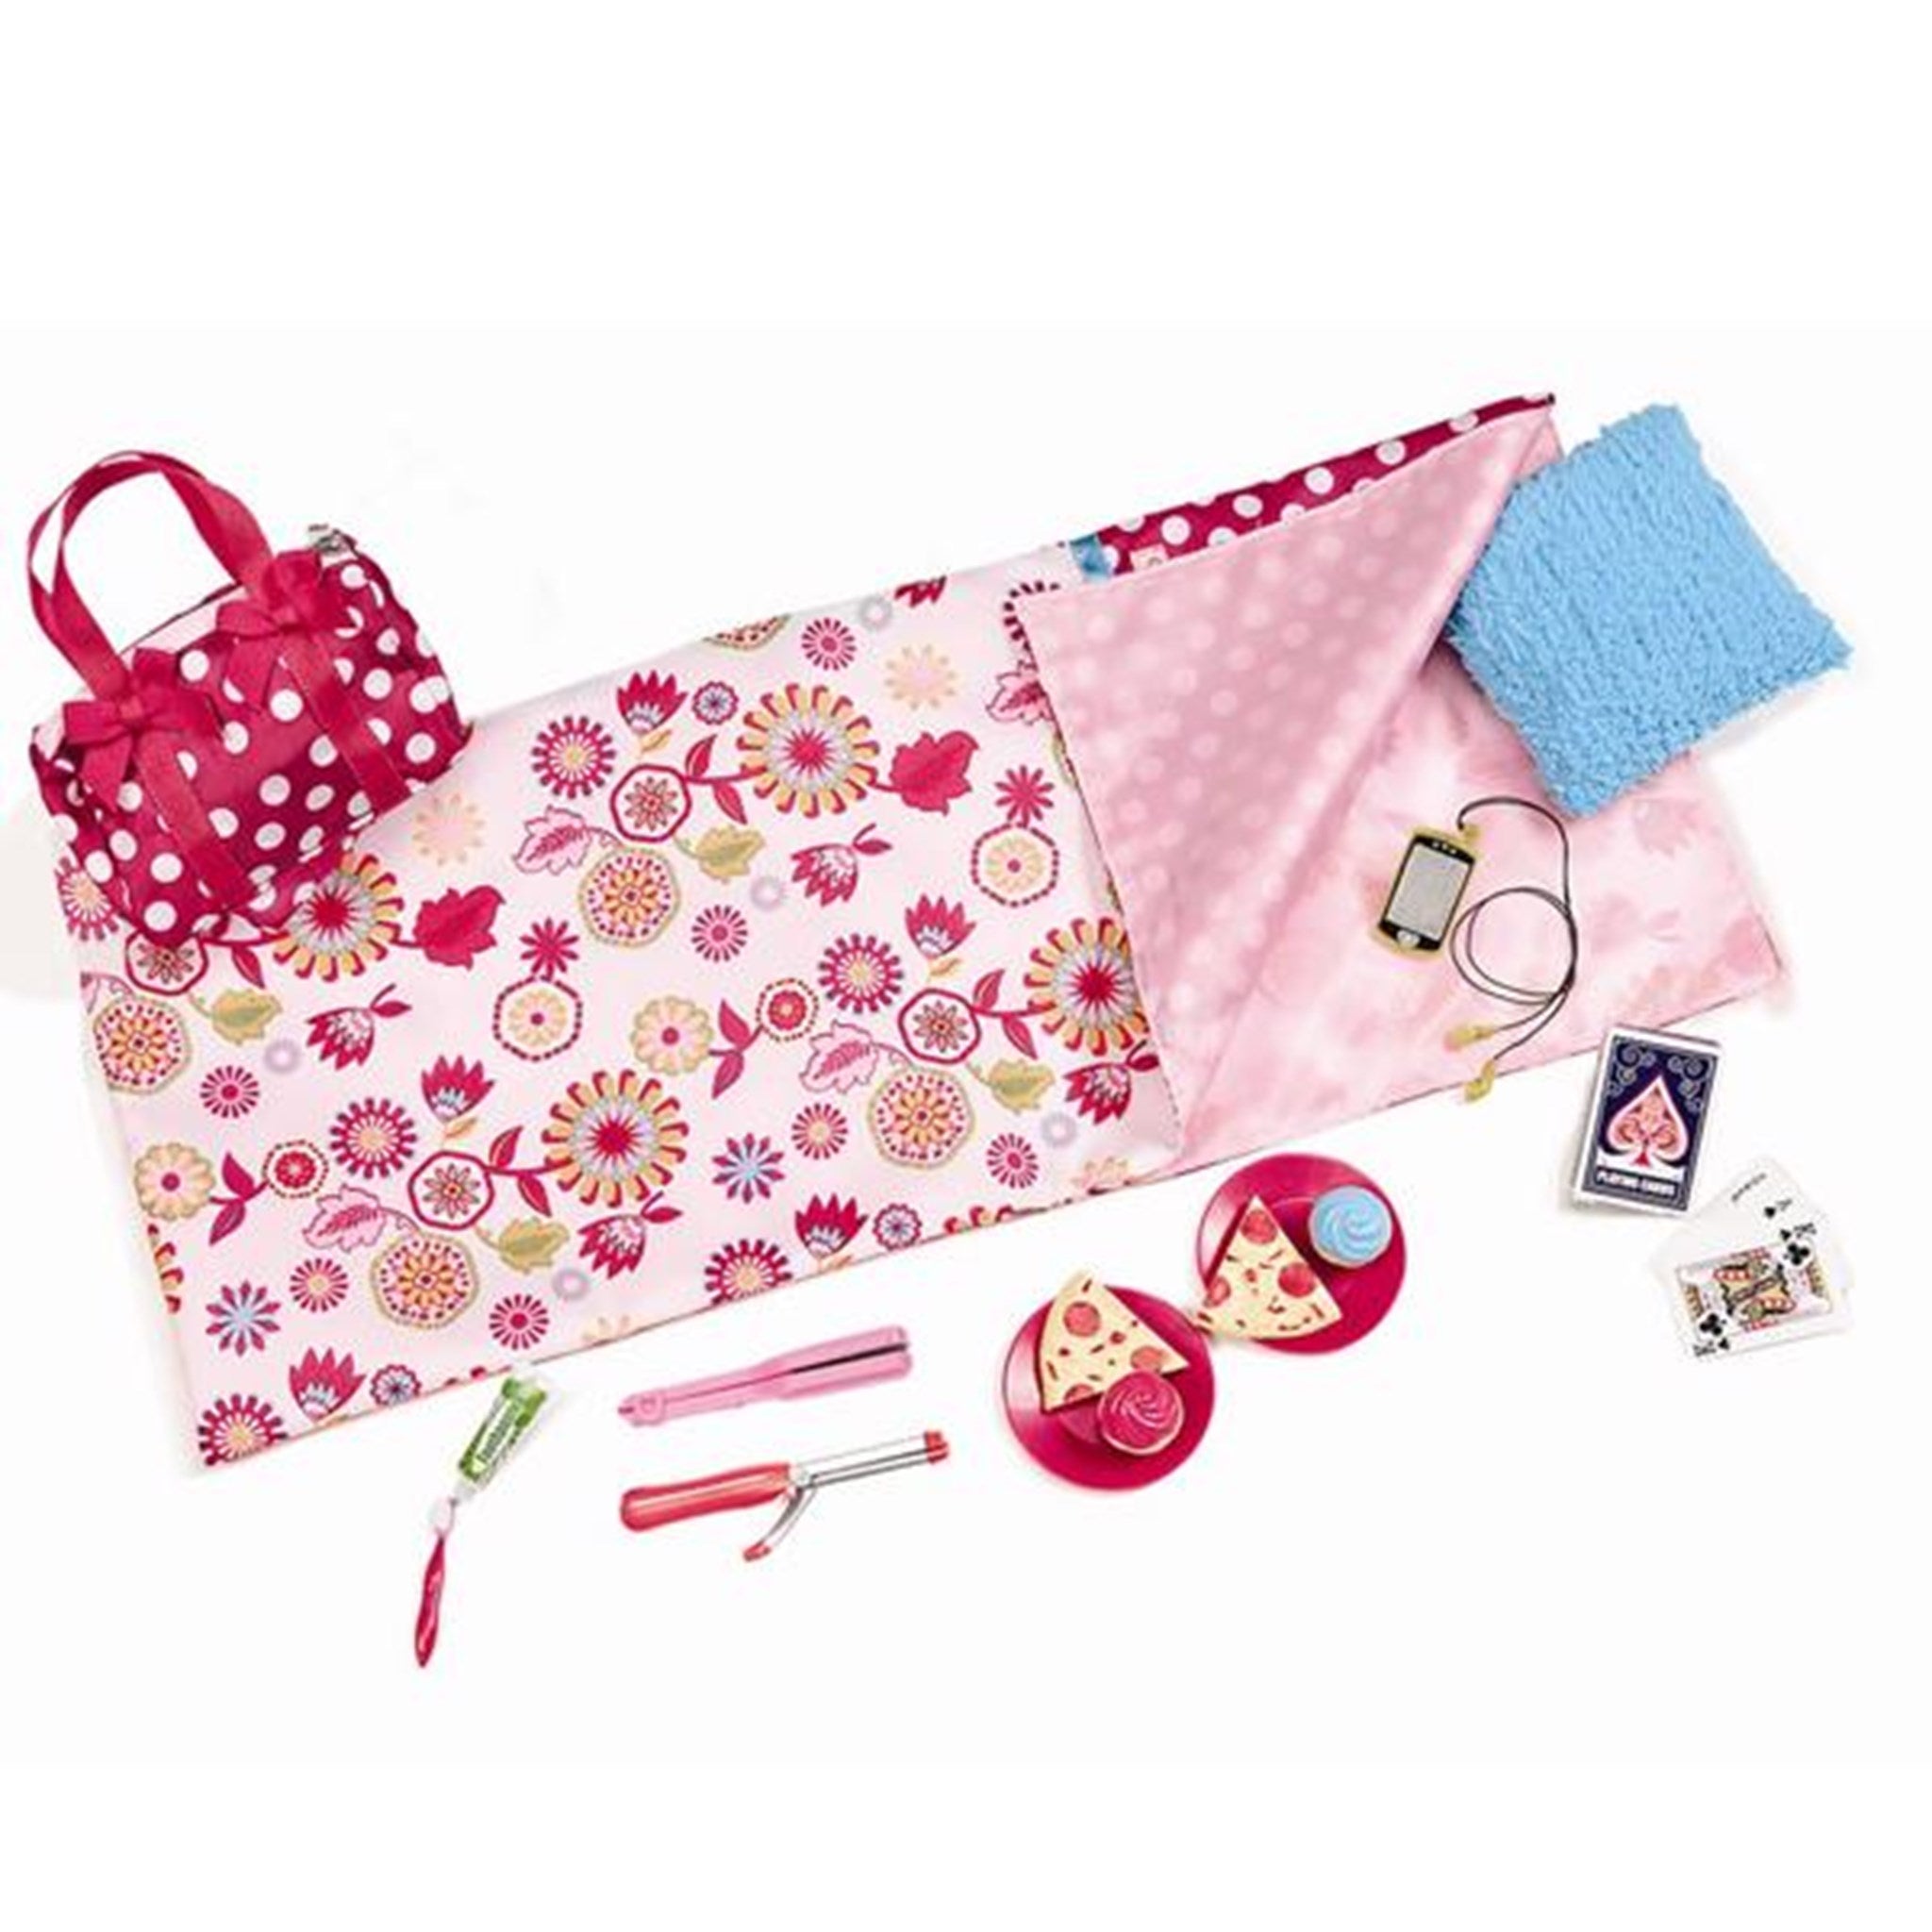 Our Generation Doll Accessories - Pyjamas Party